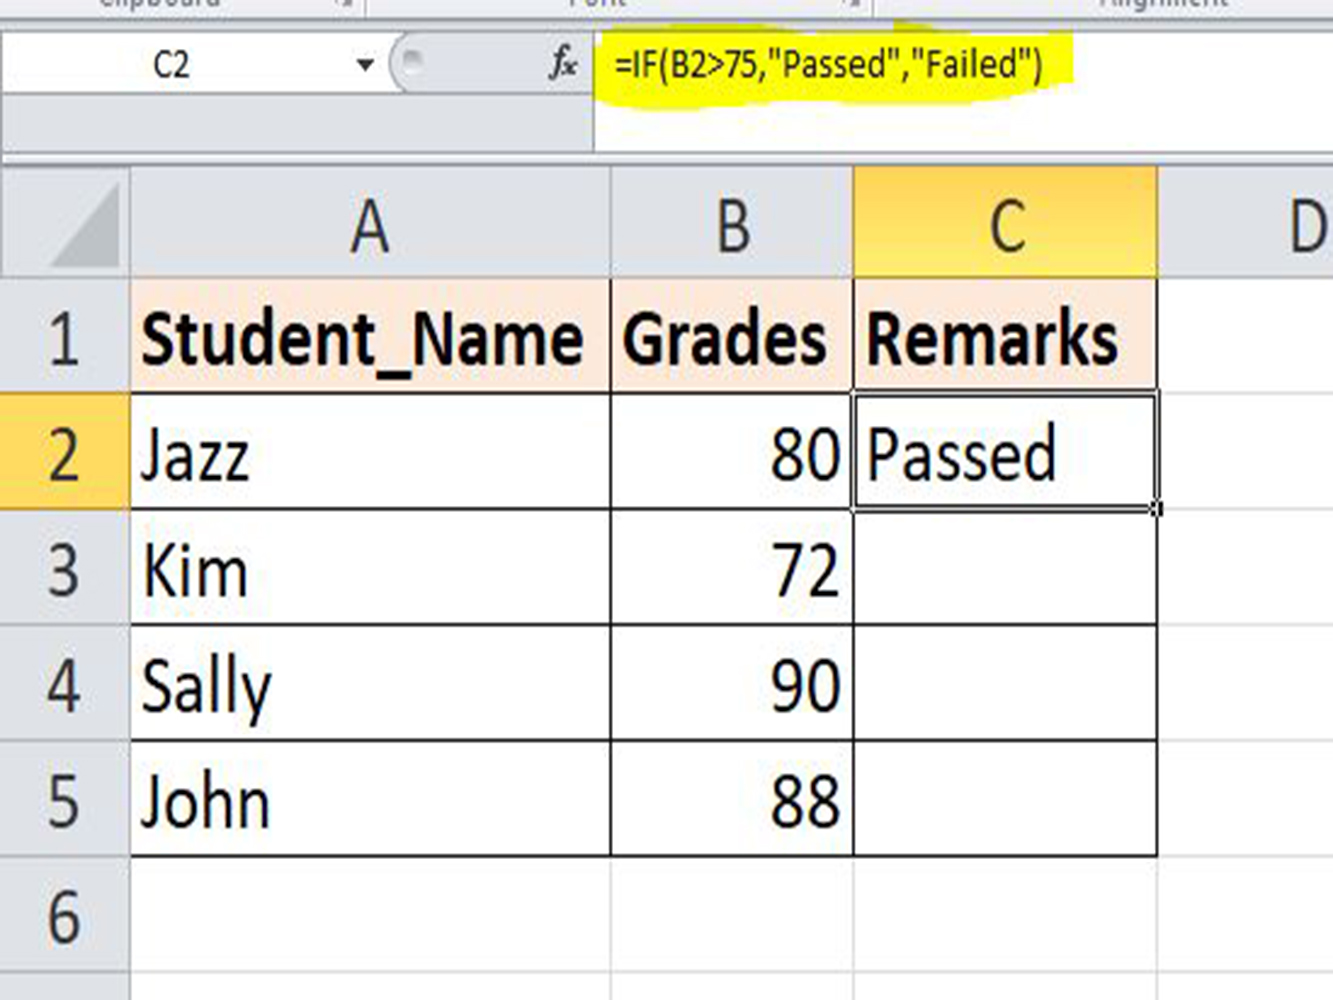 greater than formula in excel